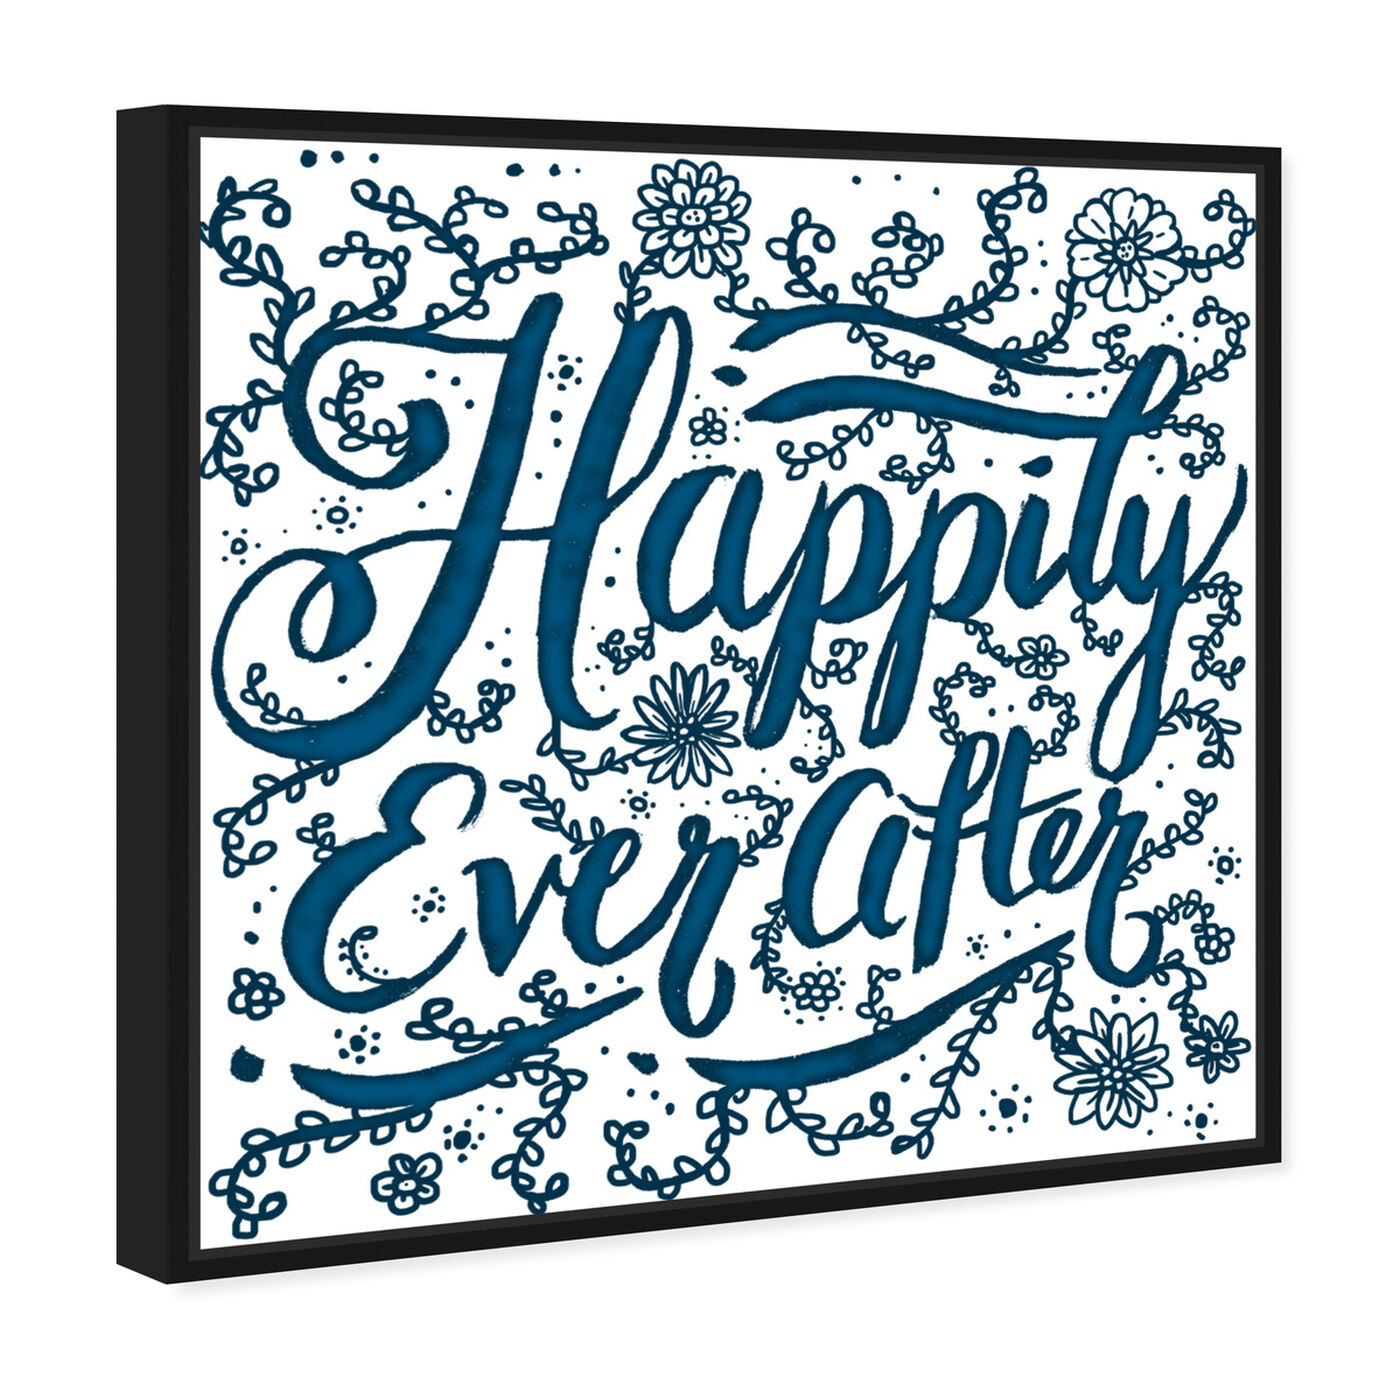 Angled view of Happily Ever After featuring typography and quotes and family quotes and sayings art.